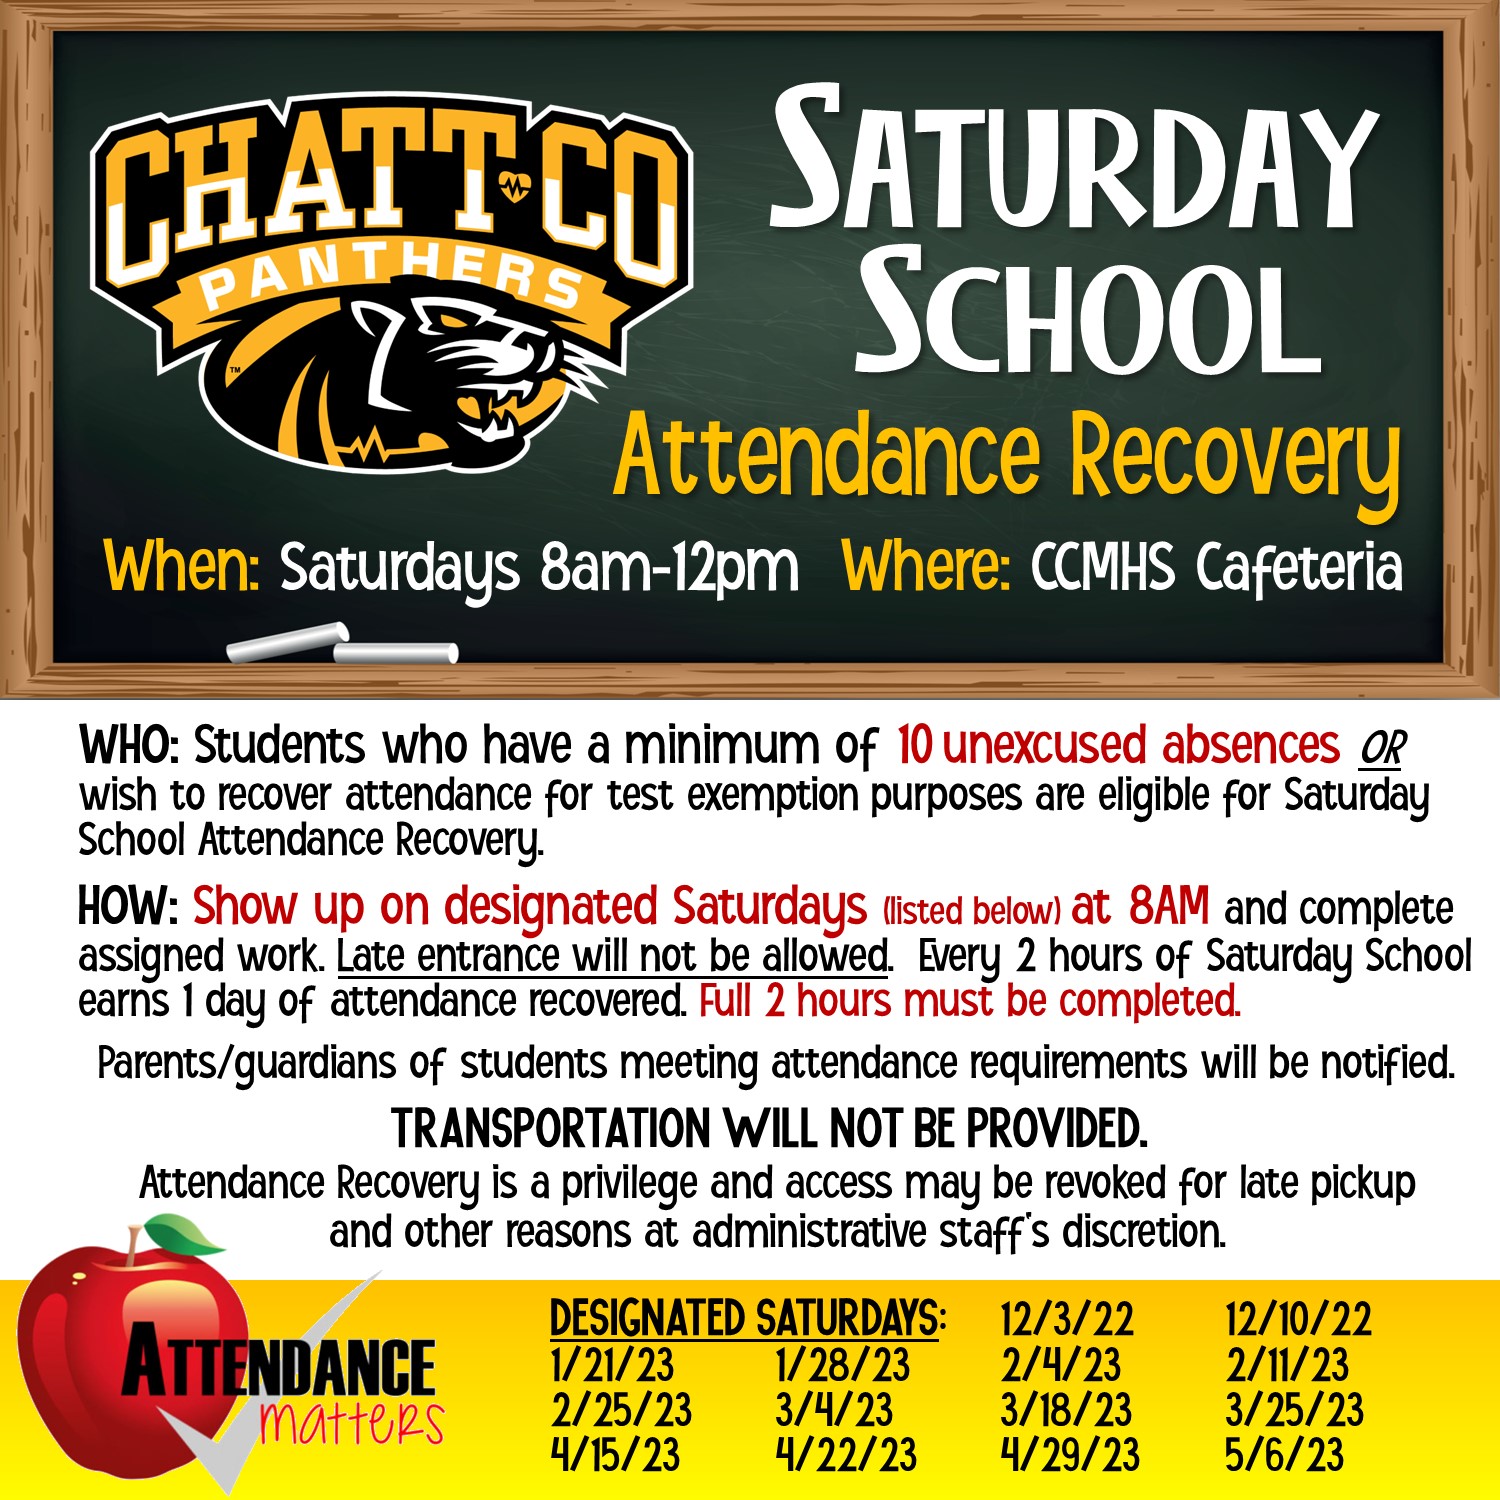 Saturday School Attendance Recovery What: Saturday School Attendance Recovery When: Saturdays, 8AM-12PM Where: CCMHS Library      Who: Students who have a minimum of 10 unexcused absences OR wish to recover attendance for test exemption purposes are eligible for Saturday School Attendance Recovery. How: Show up on designated Saturdays at 8AM (late entrance will not be allowed) and complete assigned work.  Every 2 hours of Saturday School earns 1 day of attendance recovered. (Full 2 hours must be completed). Parents/guardians of students meeting attendance requirements will be notified. Also:  Transportation will not be provided.  Attendance Recovery is a privilege and access may be revoked for late pickup and other reasons at administrative staff's discretion. Designated Saturdays:  12/3/22, 12/10/22. 1/21/23, 1/28/23, 2/4/23, 2/11/23, 2/25/23, 3/4/23, 3/18/23, 3/25/23, 4/15/23, 4/22/23, 4/29/23, 5/6/23, 5/13/22